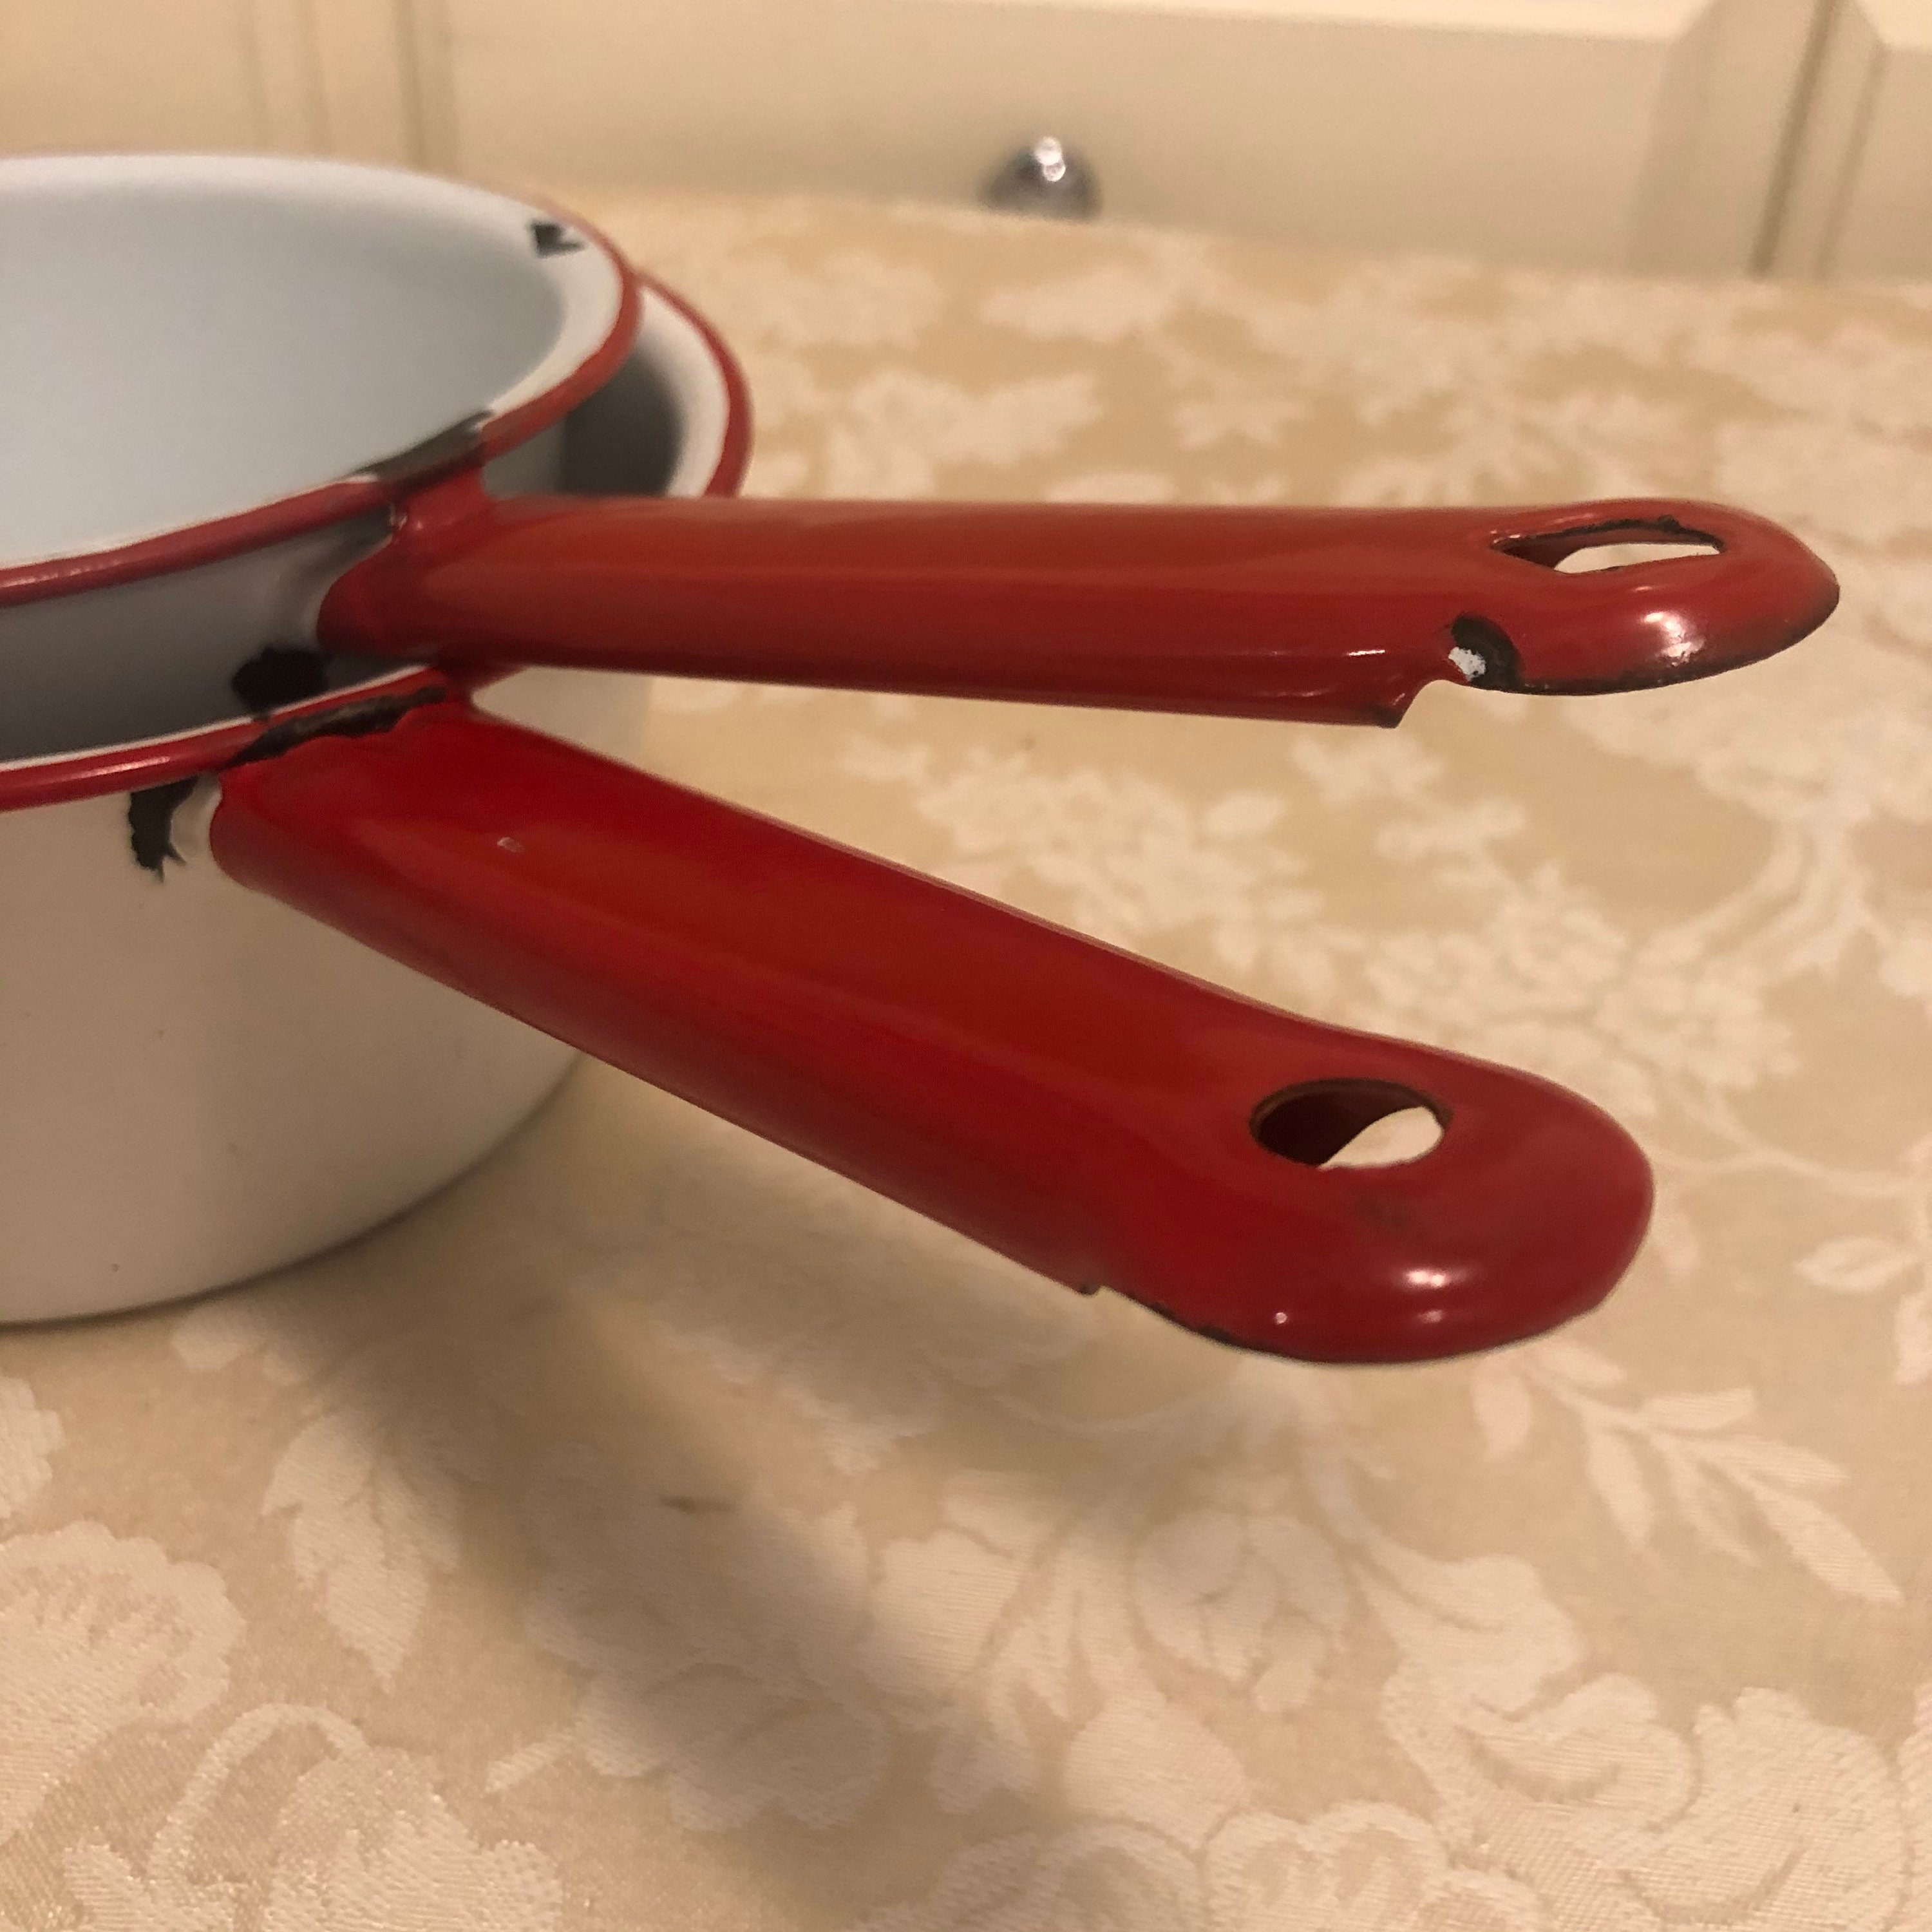 Vintage White Enamel Pan Set White With Red Handles and Rims Classic  Vintage Pan Set Camper Cook Wear Set of 2 